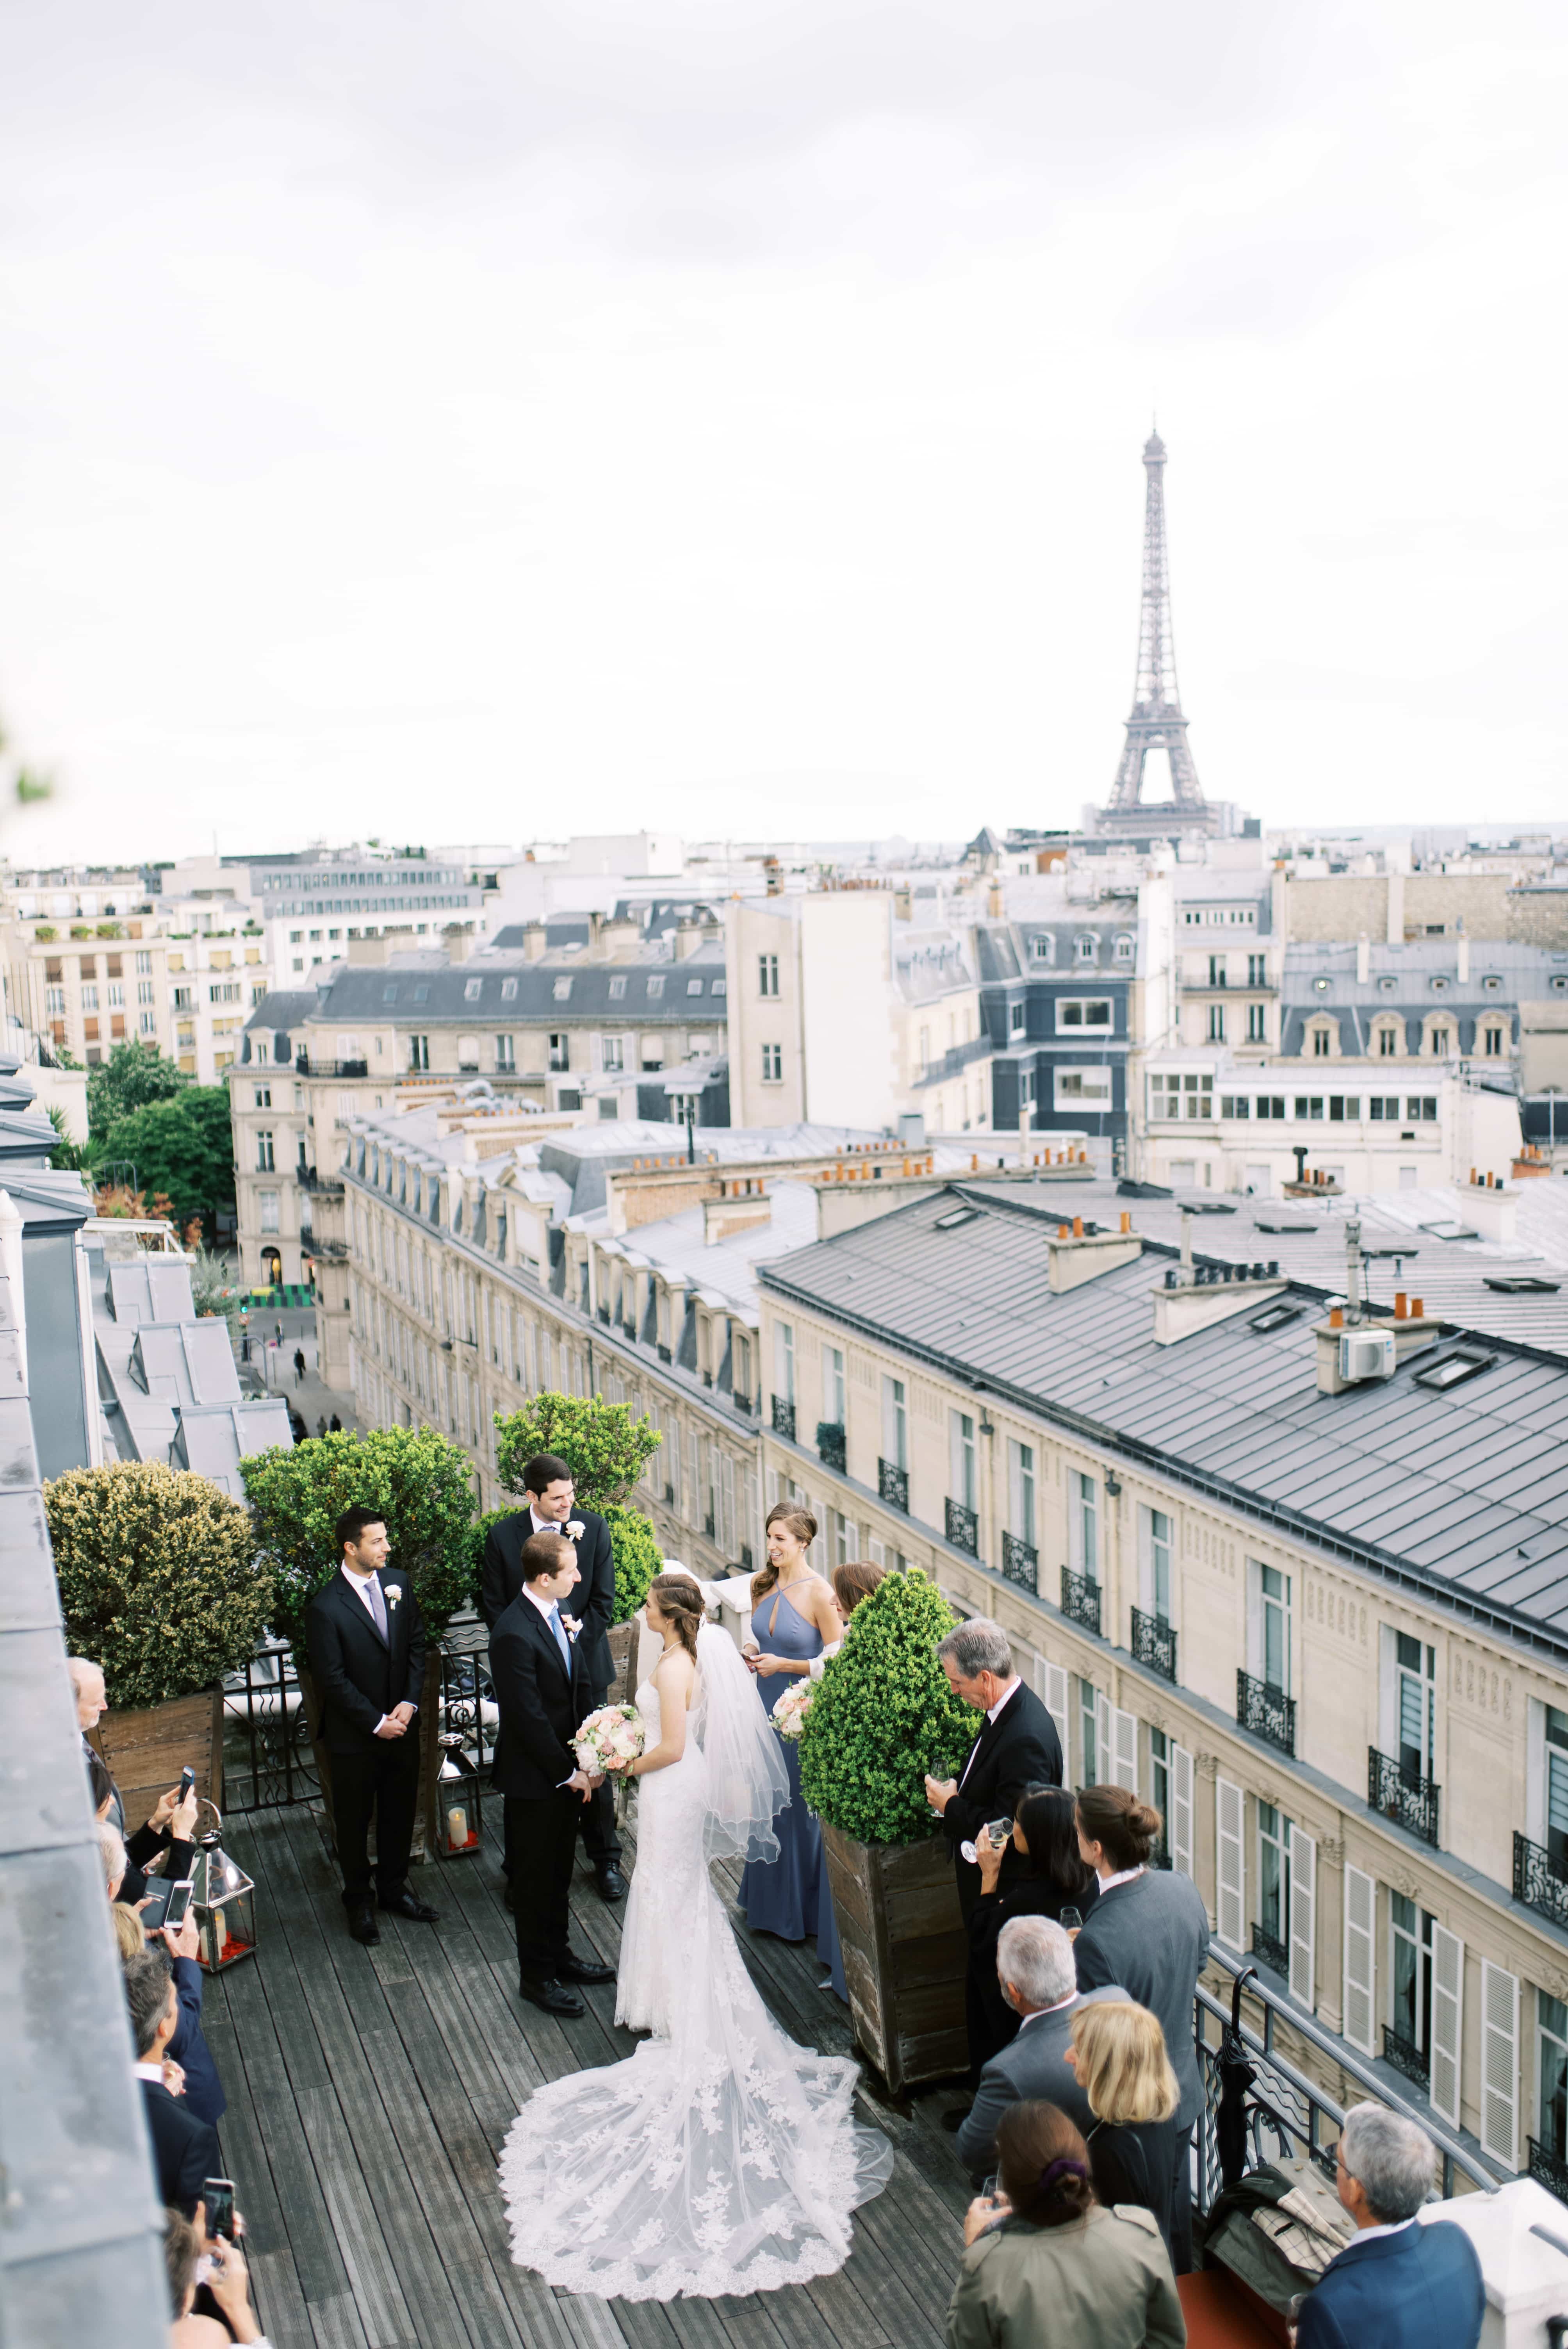 A wedding ceremony is taking place on a balcony in Paris, France, overlooking the Eiffel Tower, Photographed by North Shore, Massachusetts wedding photographer Marcela Plosker 